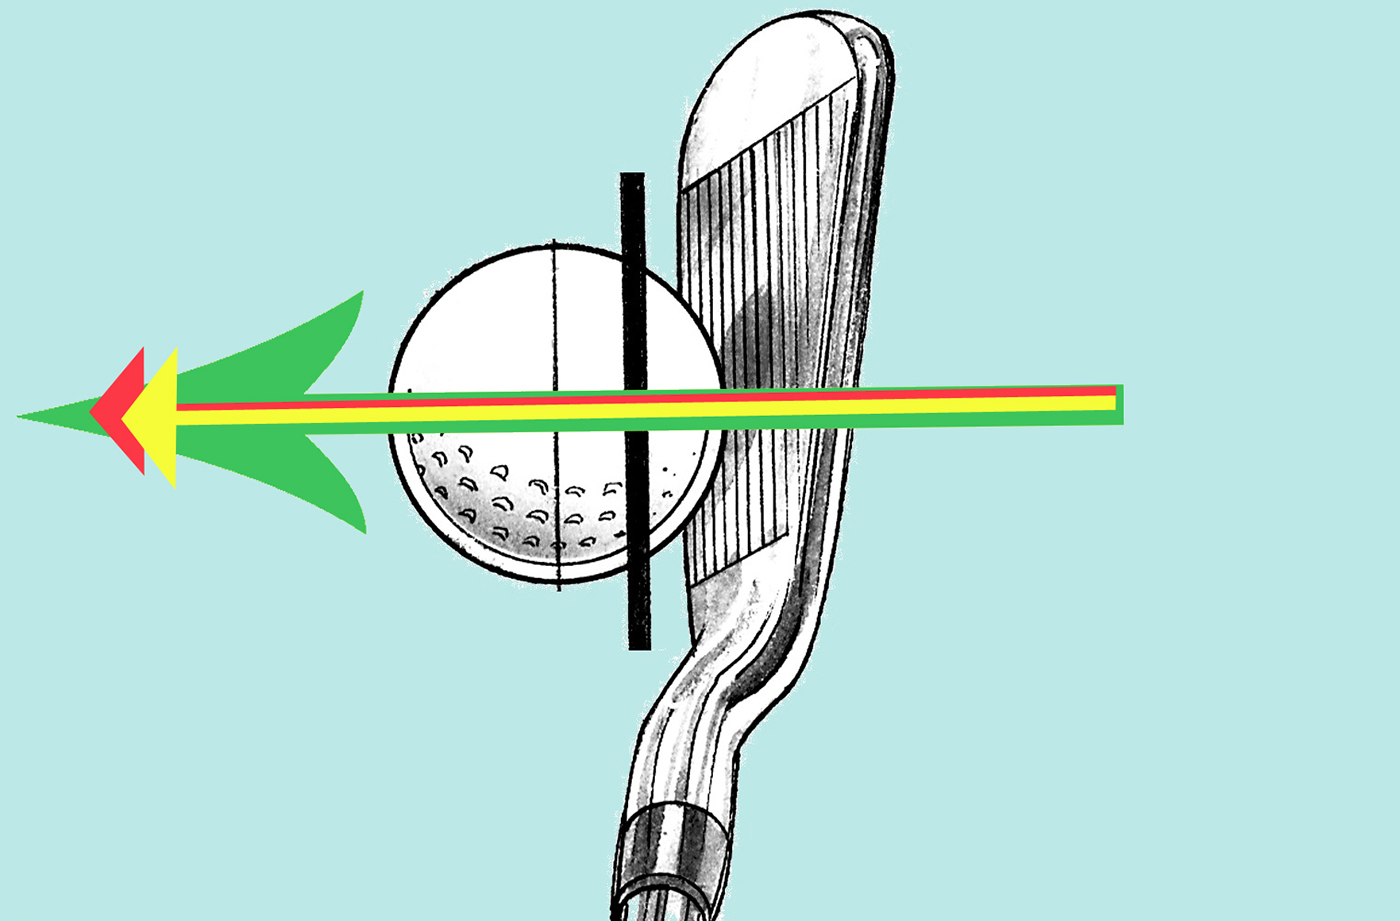 A Square Golf Club Face Angle Really is Open, or Not